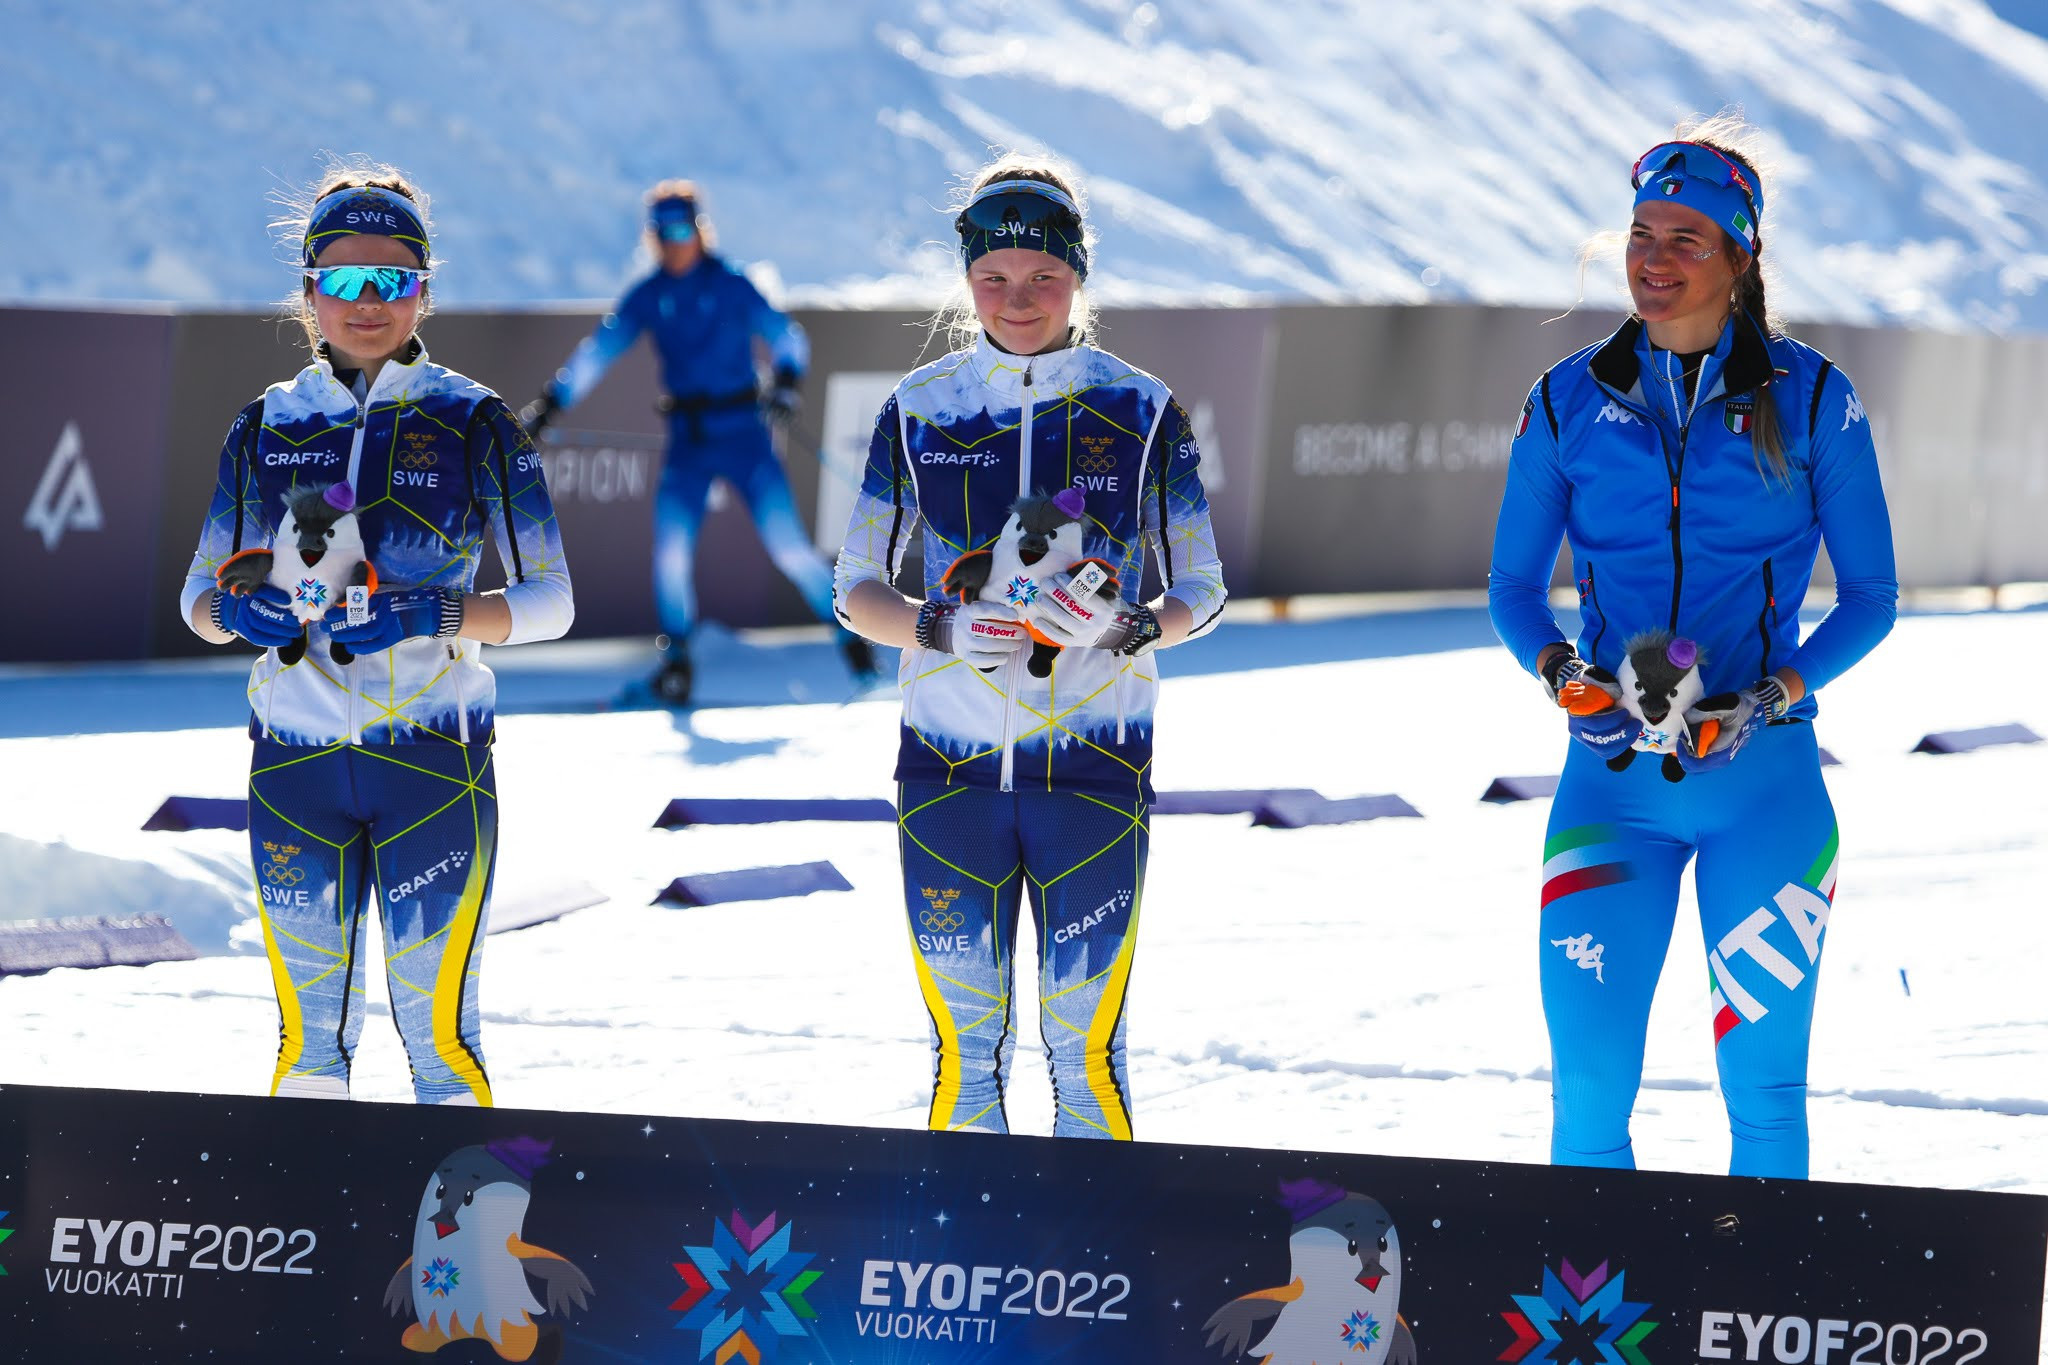 Sweden's Lisa Eriksson prevailed by more than half-a-minute in the women's 7.5km freestyle ©EYOF 2022 Vuokatti